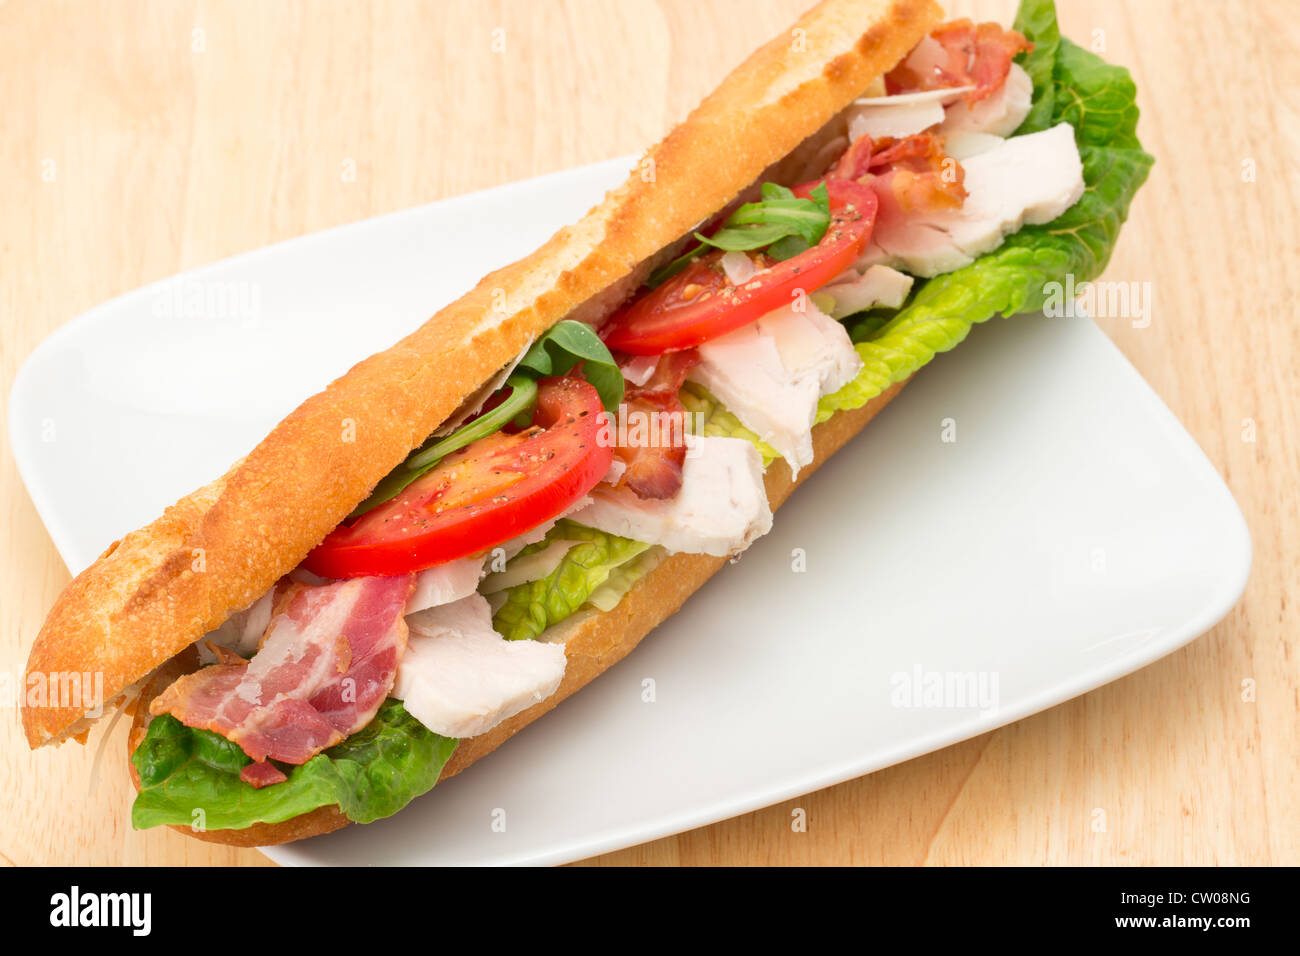 Chicken, bacon and salad filled baguette served on a white plate - studio shot Stock Photo